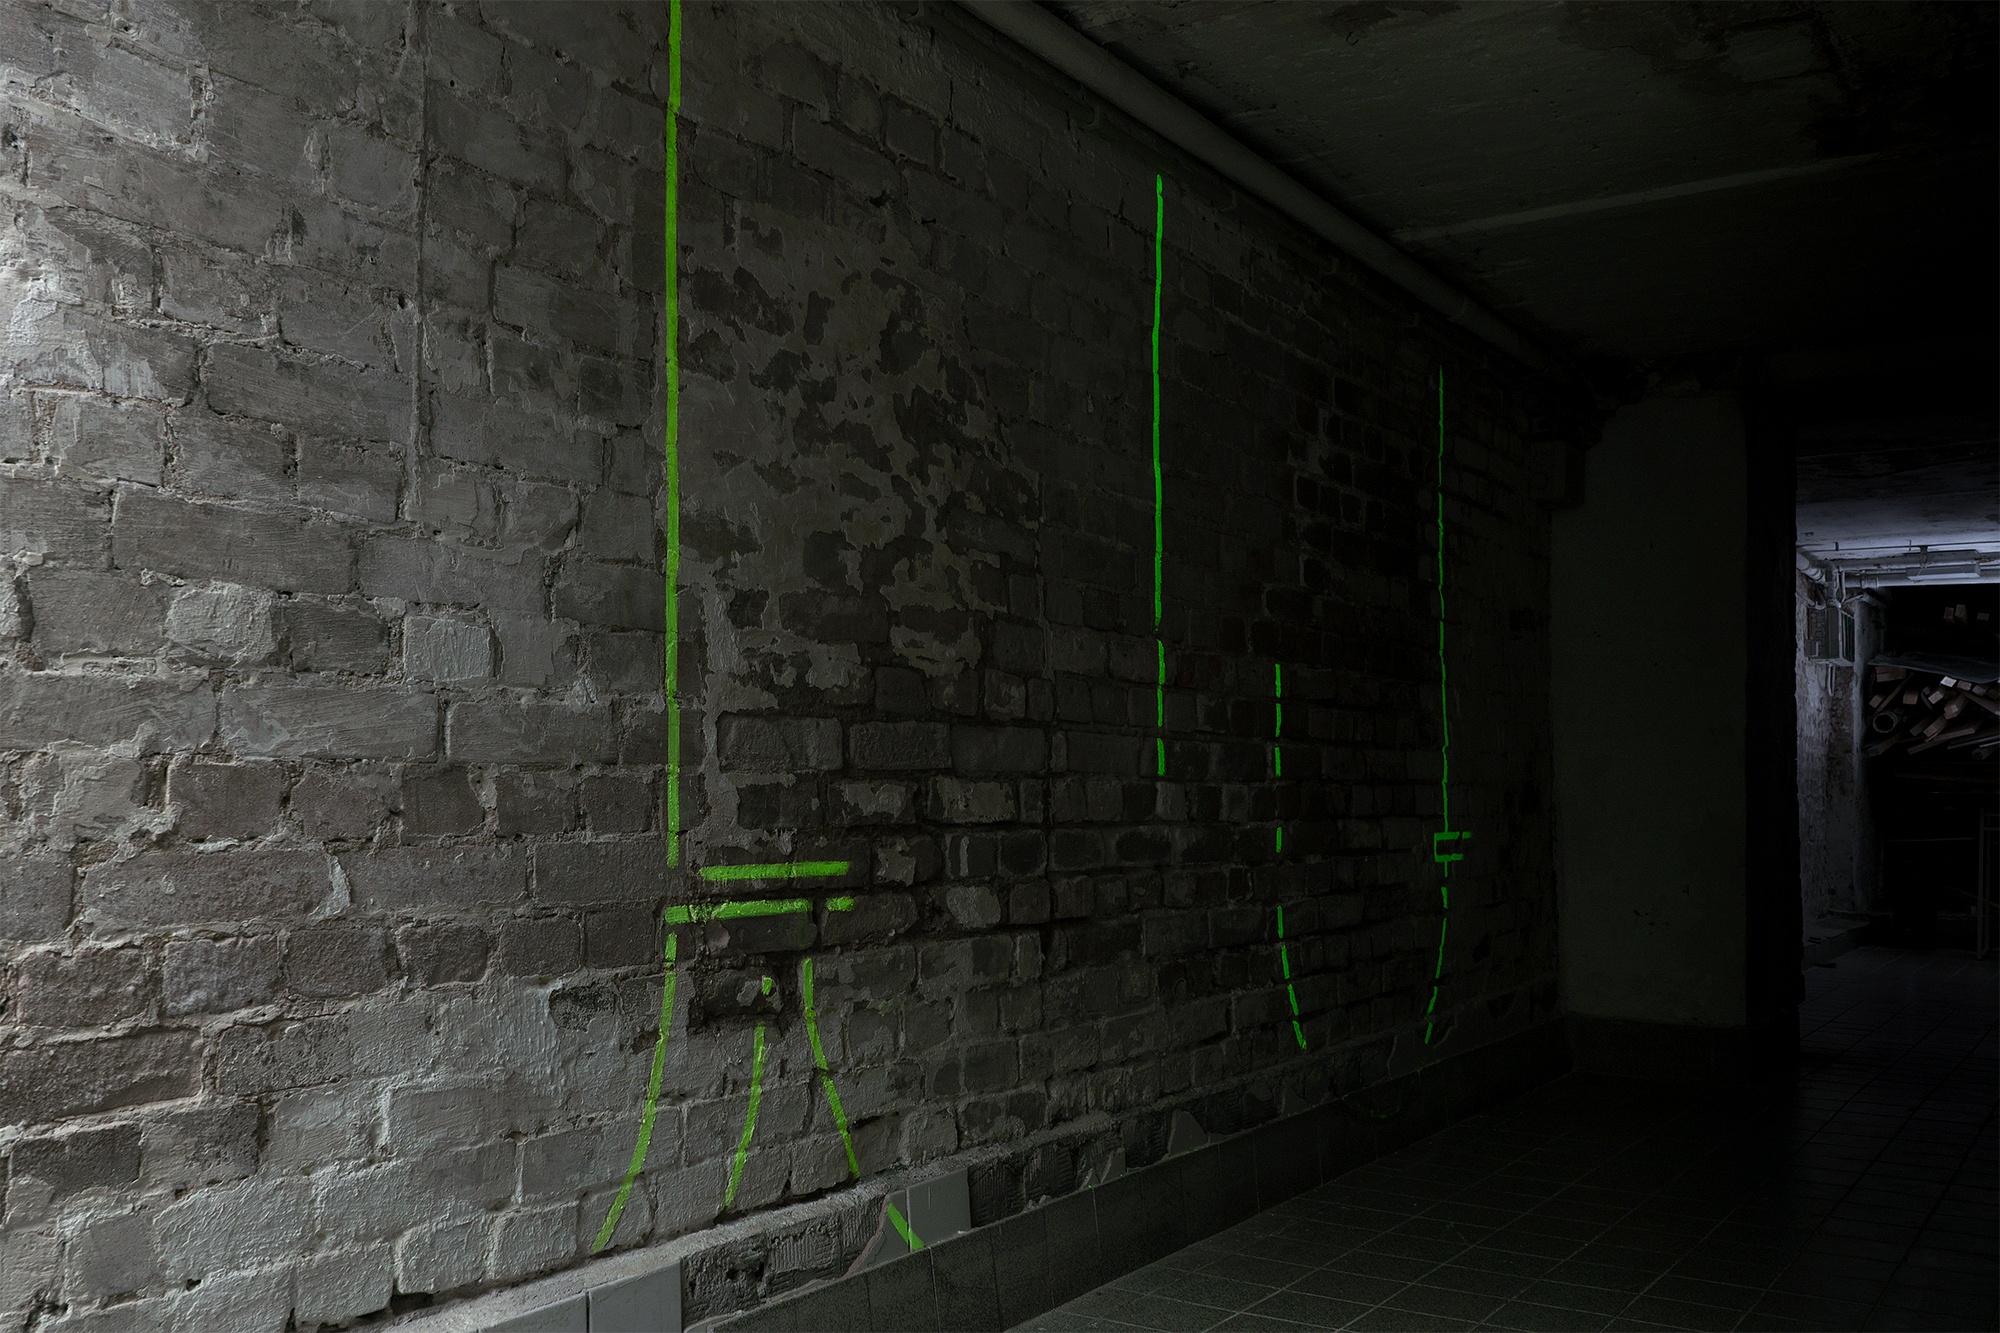 Rehearsal for demolition - 2020, reflective pigment on wall, installation view at Horse &#38; Pony, Berlin